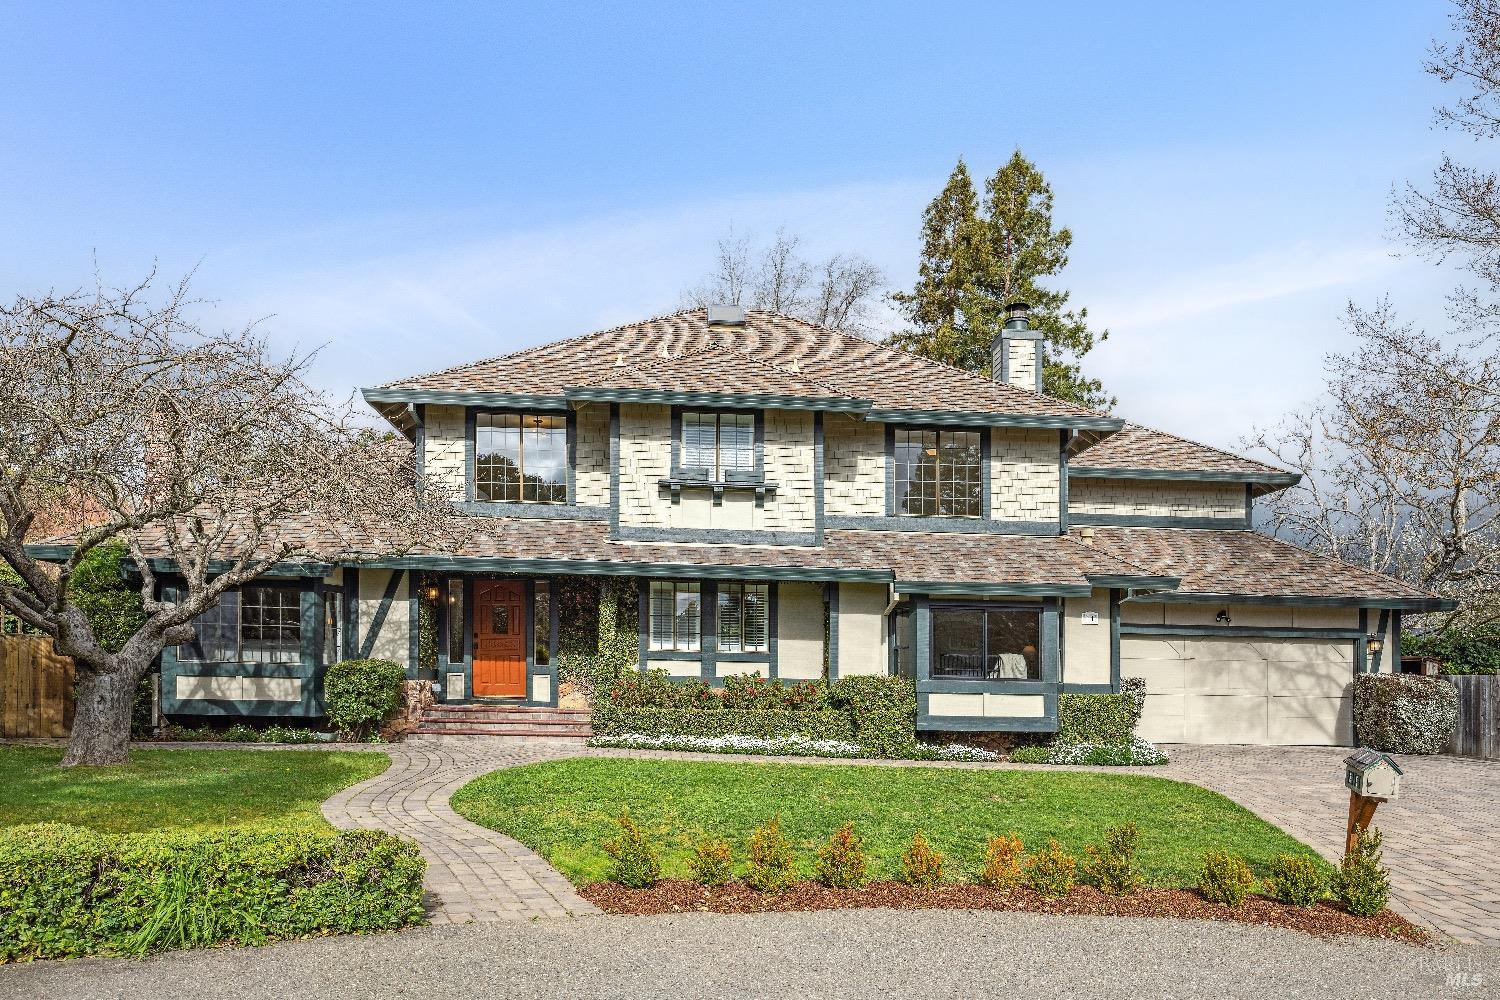 Welcome to 11 Williamson Ct, ideally placed at the end of a private cul de sac in sought-after Pleasant Valley. This pristine home boasts 5 beds, 2.5 baths, 2976 sq ft on a level 13,328 sq ft lot. The formal entry leads to a grand living room with coffered ceilings, Mahogany floors & wood-burning fireplace. Remodeled kitchen has Wolf range, granite counters, stainless appliances, breakfast bar & flows to the spacious family room w frplc. A formal dining room, large 5th bedroom, updated powder room & laundry room complete the main level. Upstairs, the spacious primary suite offers cathedral ceilings, sitting area & new spa-like bath. Upper level has 3 more bedrooms, all positioned around an open, airy landing & a tastefully remodeled 2nd bath. Fresh updates include completely painted interiors, new carpets, light fixtures & hardware. French doors open to the secluded back patio with a gas BBQ, level grass yard area, hot tub, mature fruit trees and a huge side yard. Additional features: newer central heat & AC, gleaming hardwood floors, crown molding, wainscoting, double-pane windows, 2 water heaters & 2 car garage with workbench. Conveniently located near schools, trails and shopping. This home exudes pride of ownership, timeless style, and ample space. Truly a must-see property!